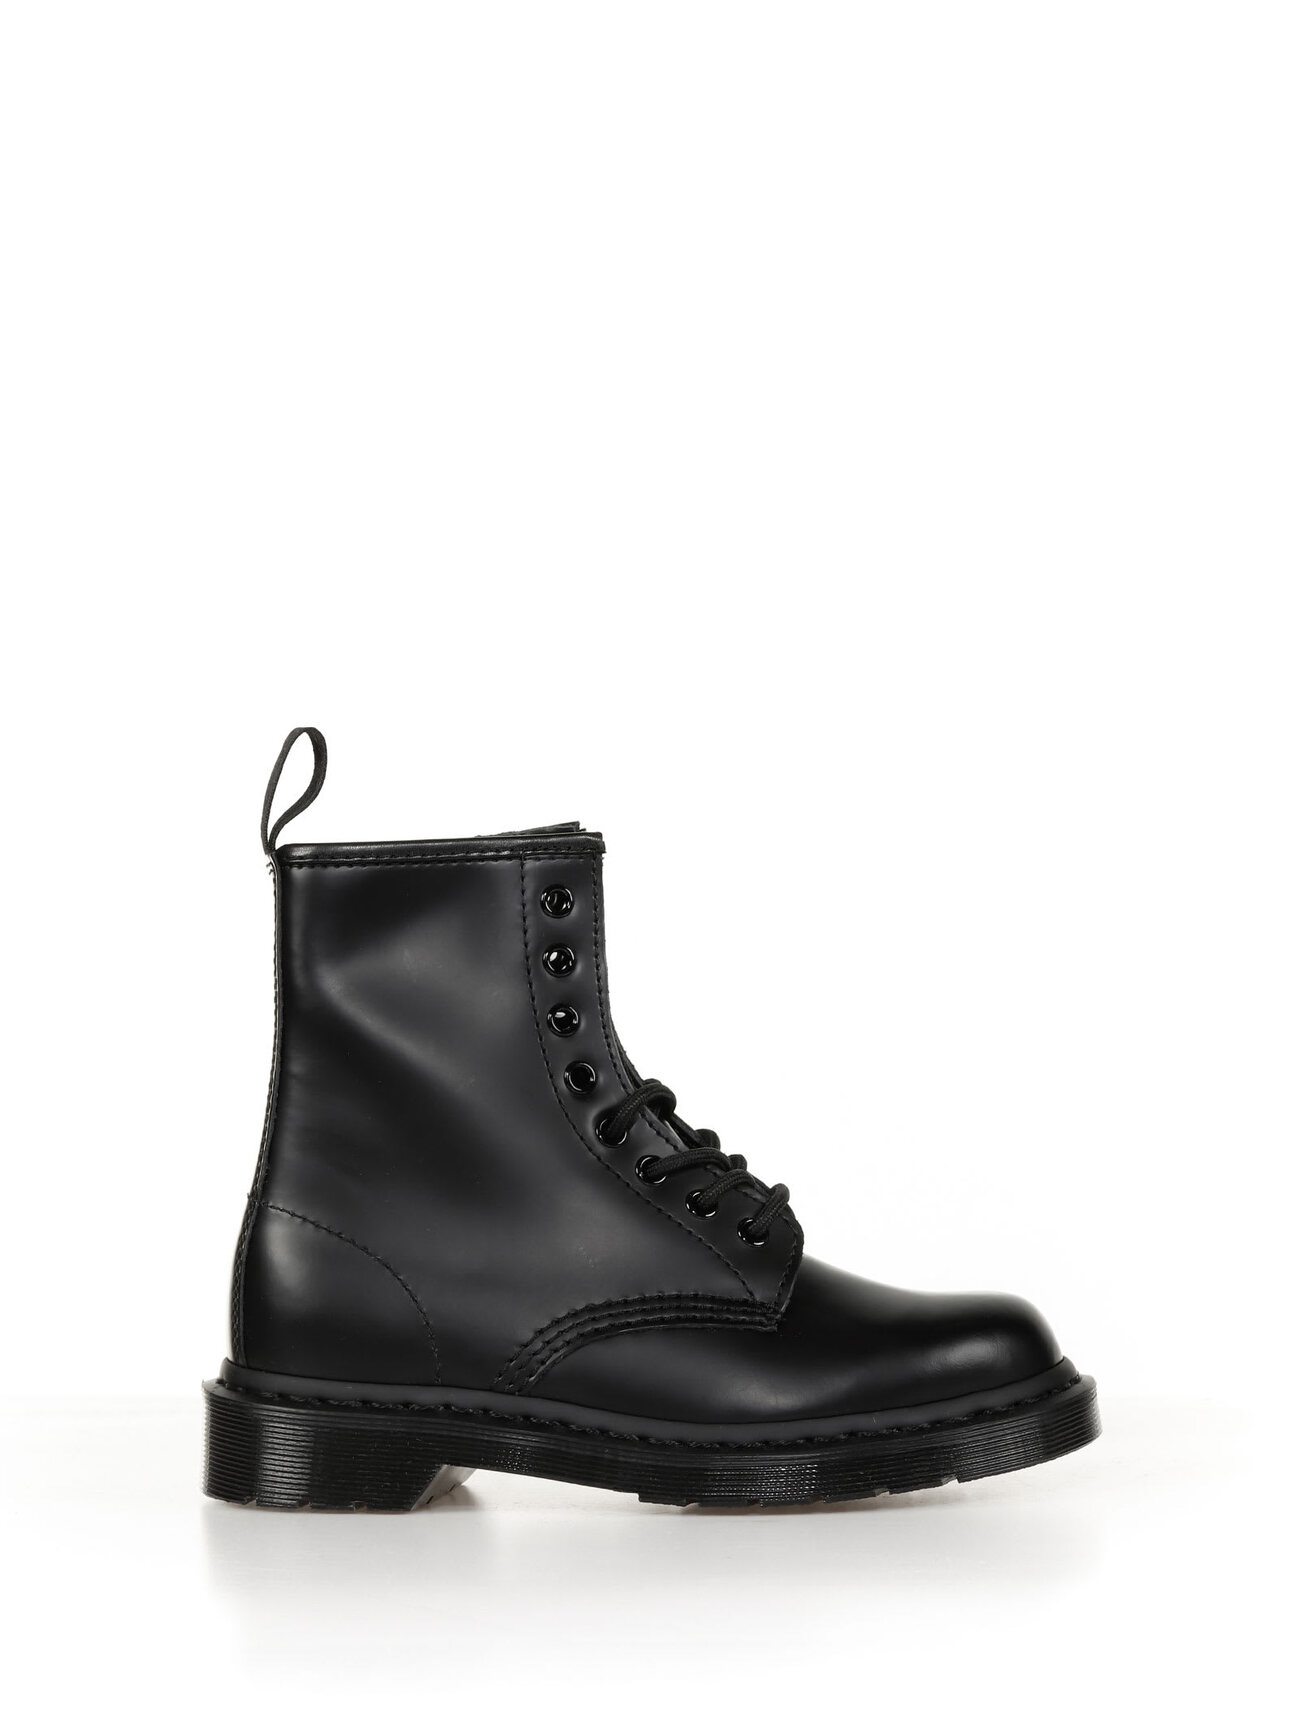 Dr. Martens Total Black Ankle Boots in nero